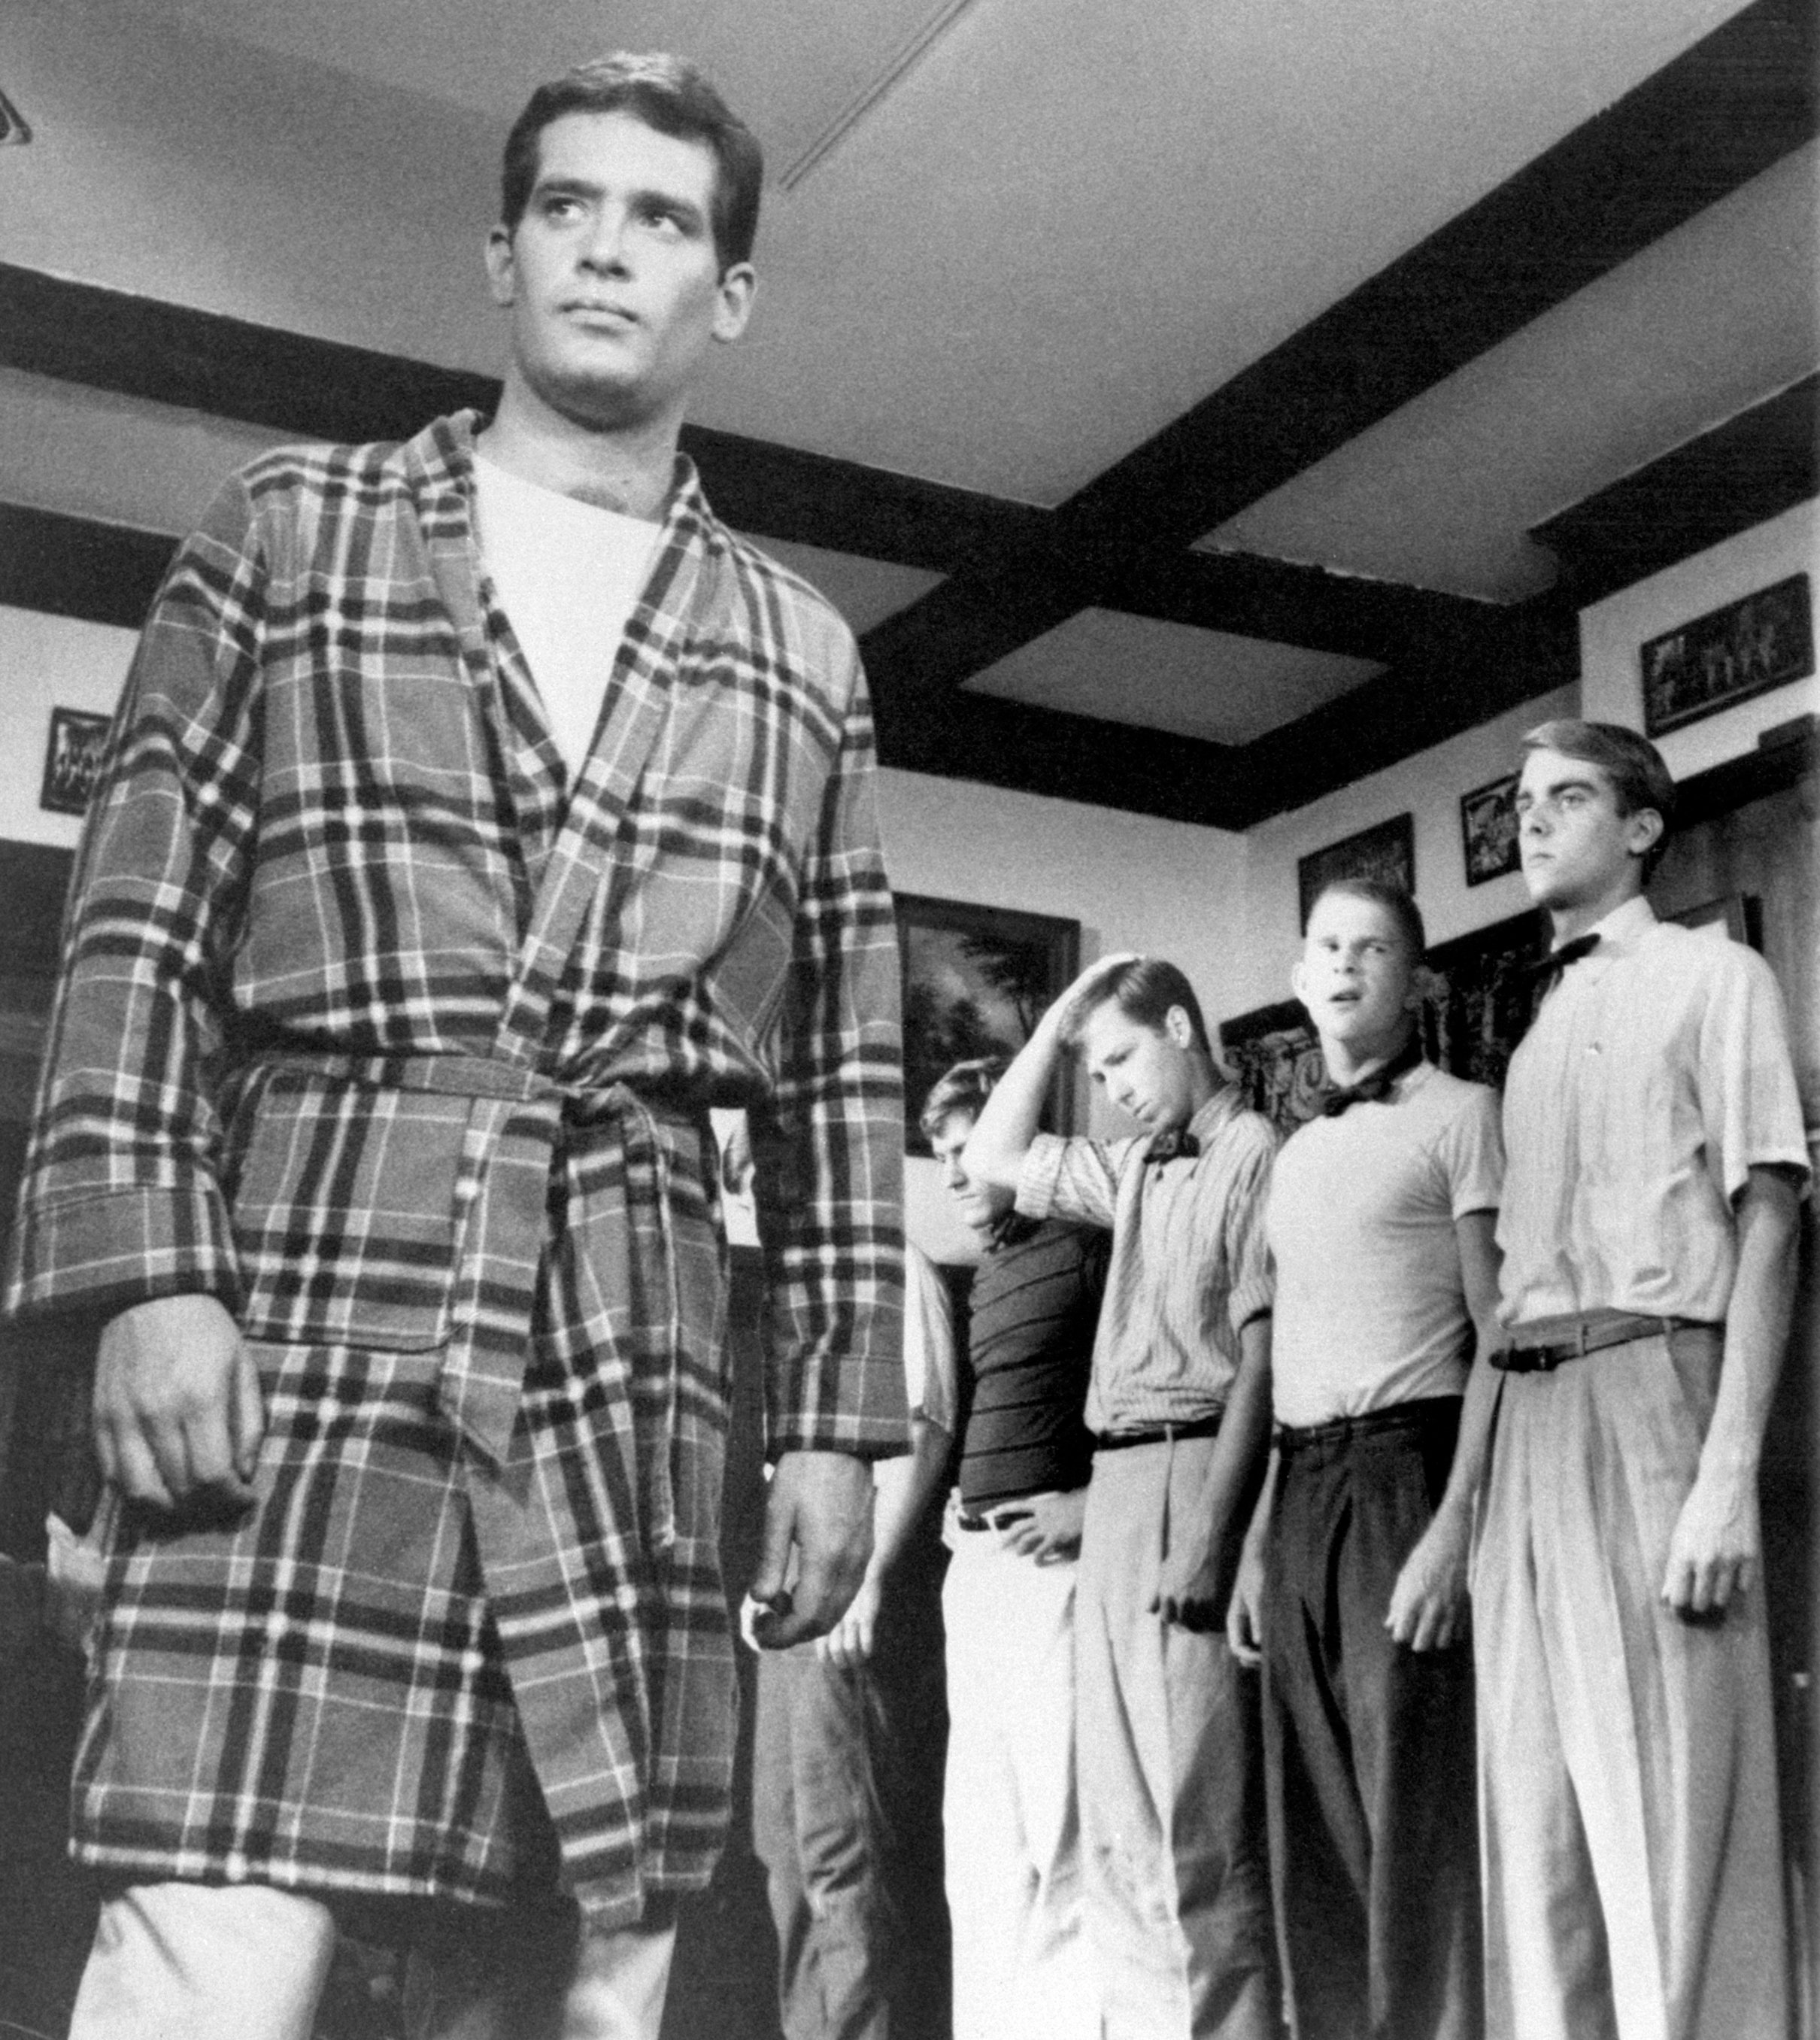 An undated picture of Scott Newman, wearing a bathrobe in this scene from the 1977 movie "Fraternity Row." | Photo: Getty Images